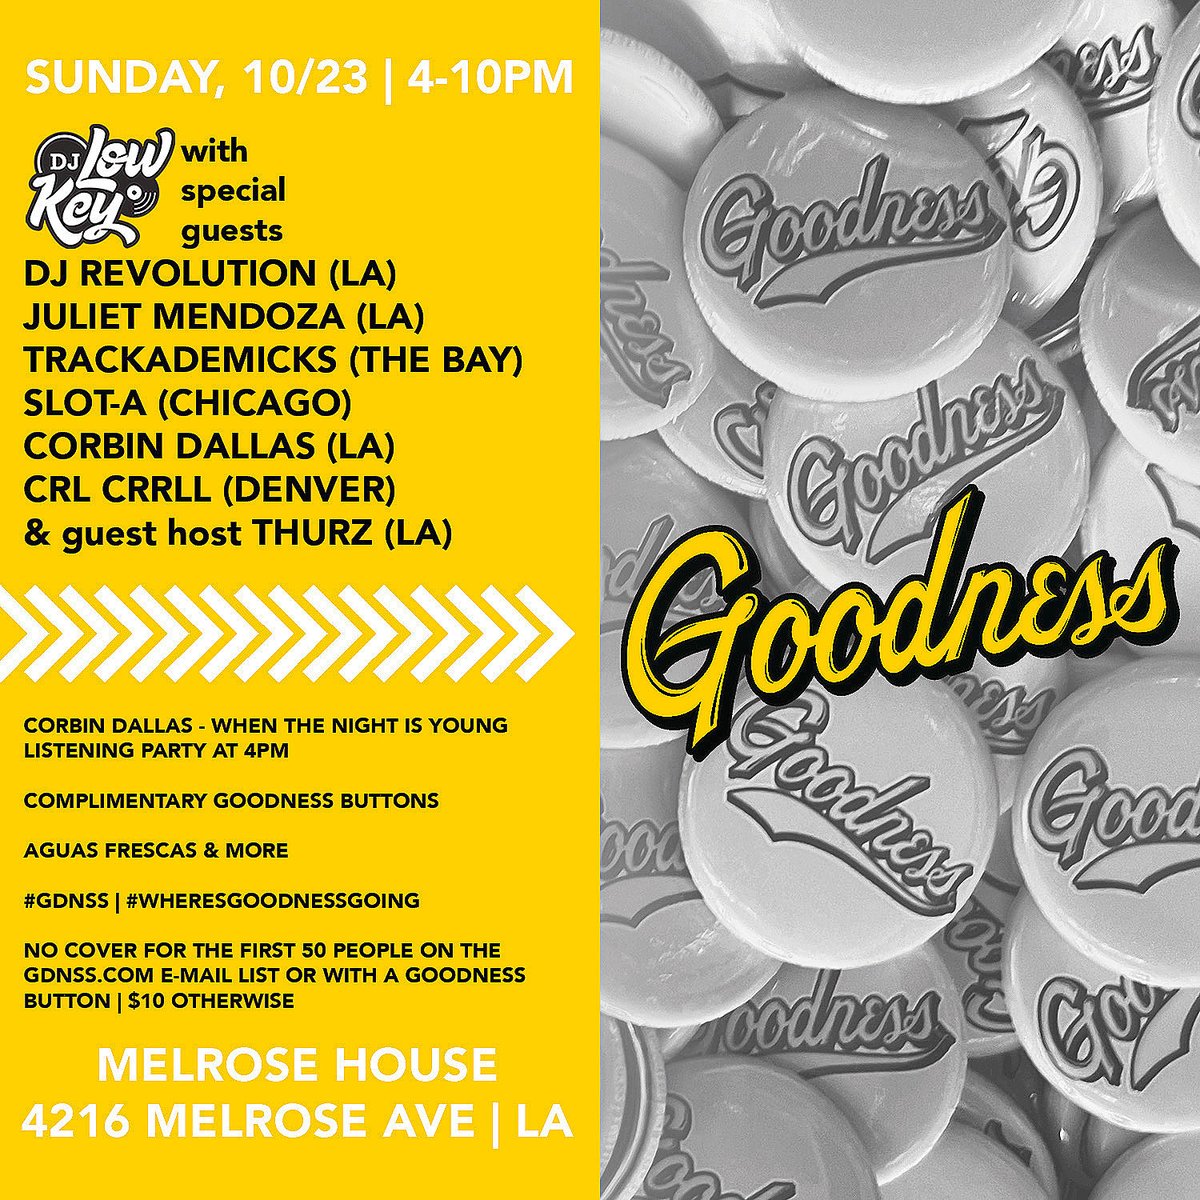 SUNDAY, 10/23 at 4pm LA -> Goodness w/ @DJLowKey + special guests @DJRevolution, Juliet Mendoza, @Trackademicks, @IAmSlotA, Corbin Dallas, @CRLCRRLL & guest host @Thurzday at Melrose House!!! Complimentary #GDNSS buttons/stickers, aguas frescas & lots more!